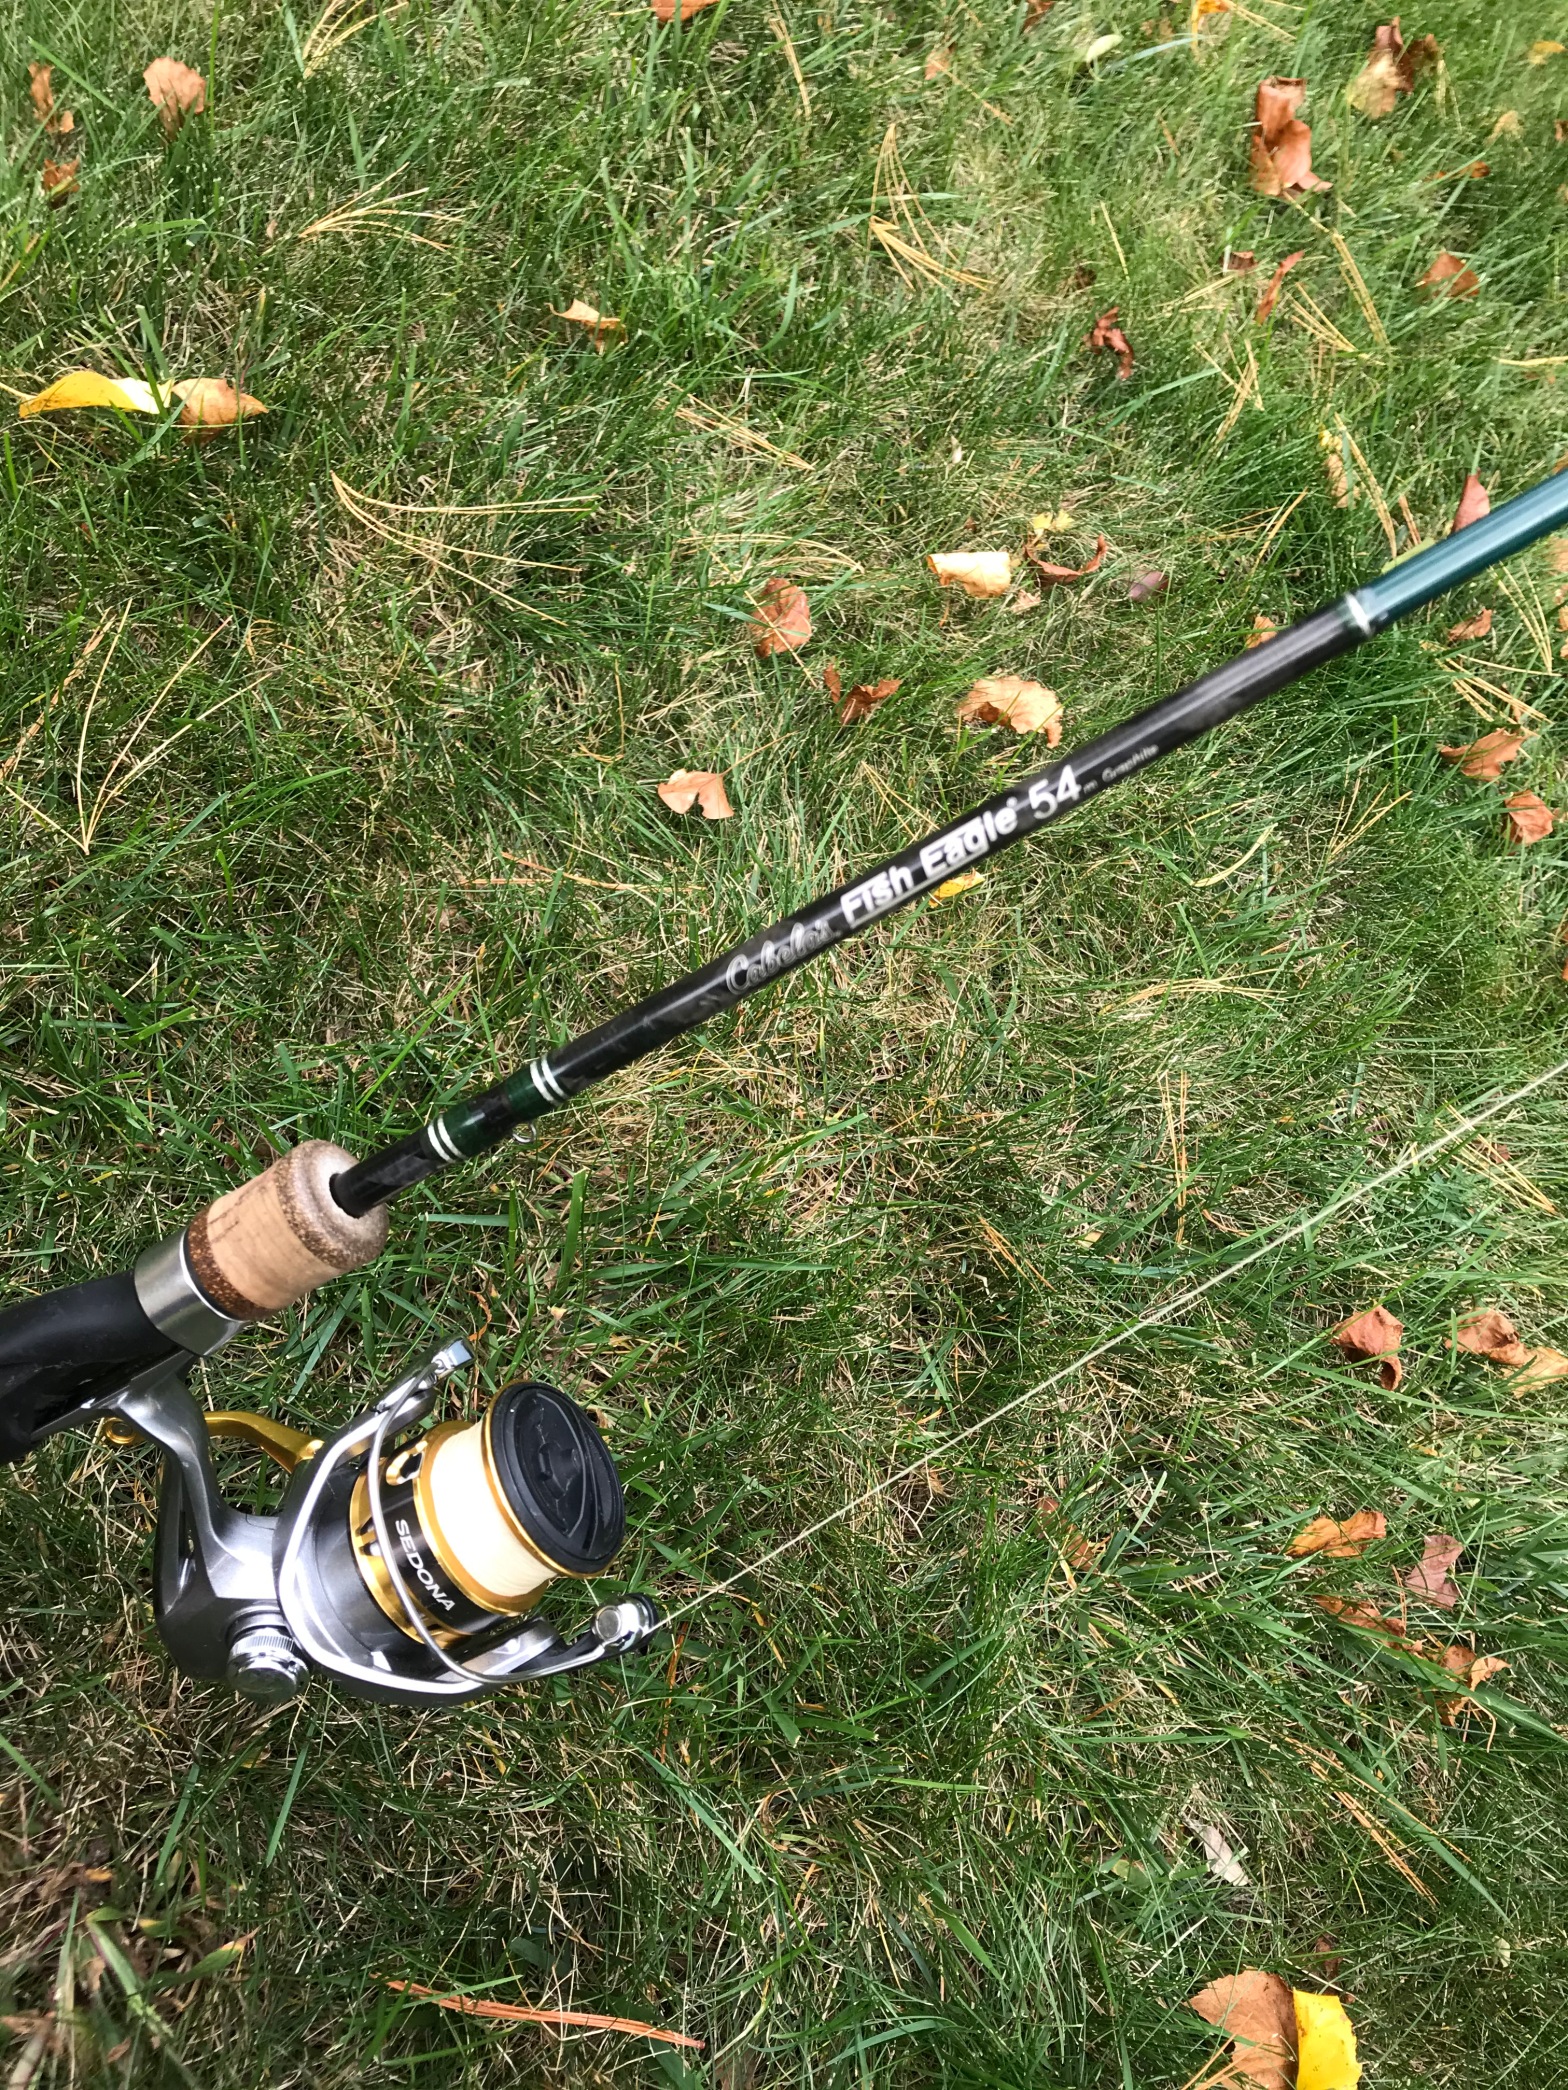 Shimano Fishing Rod, Reel and Accessories [For Sales] [Used]